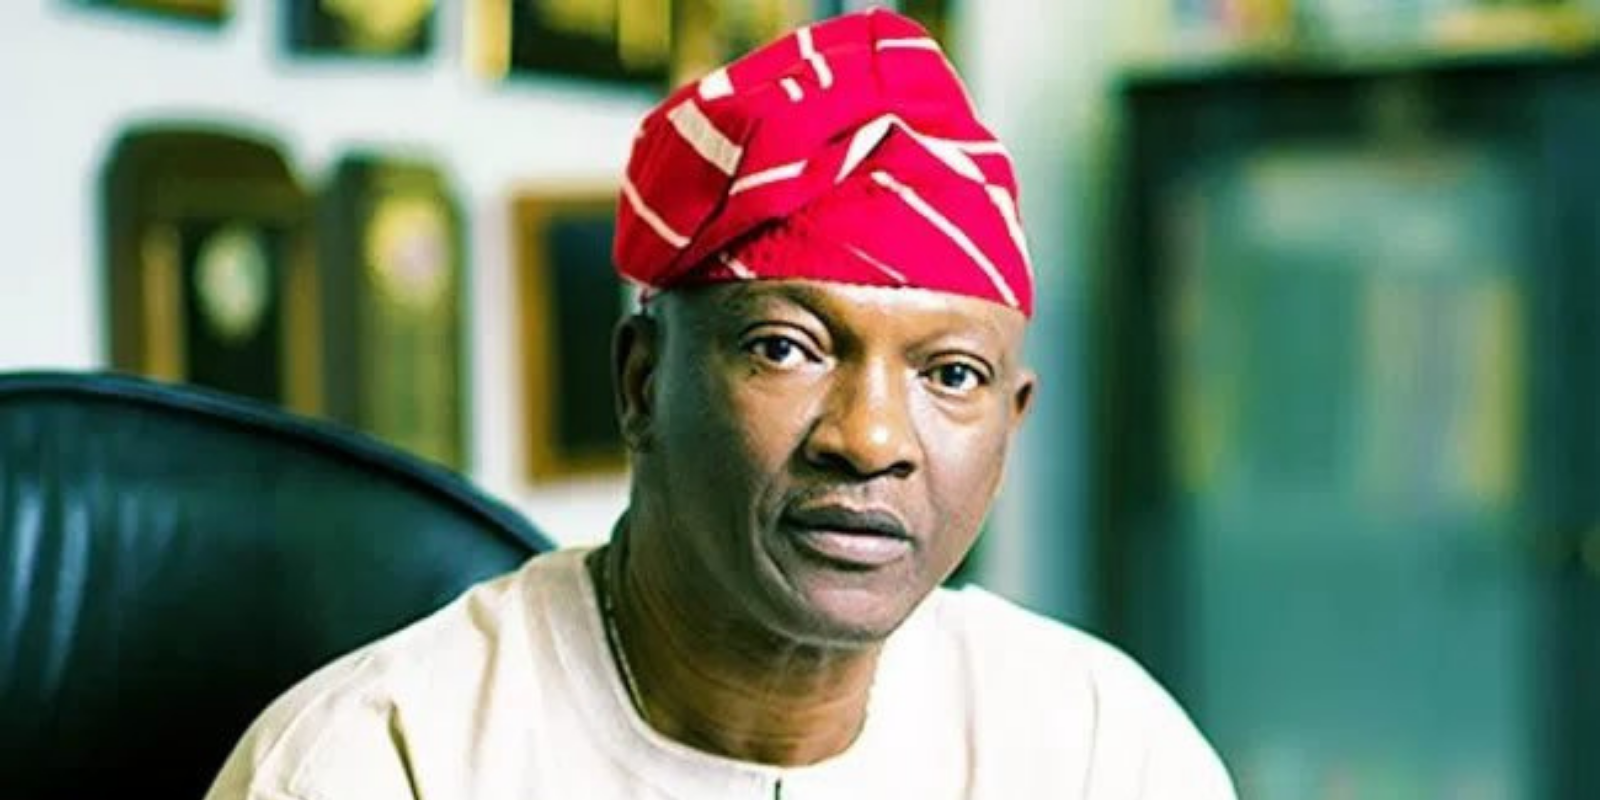 Jimi Agbaje was the governor of which state?